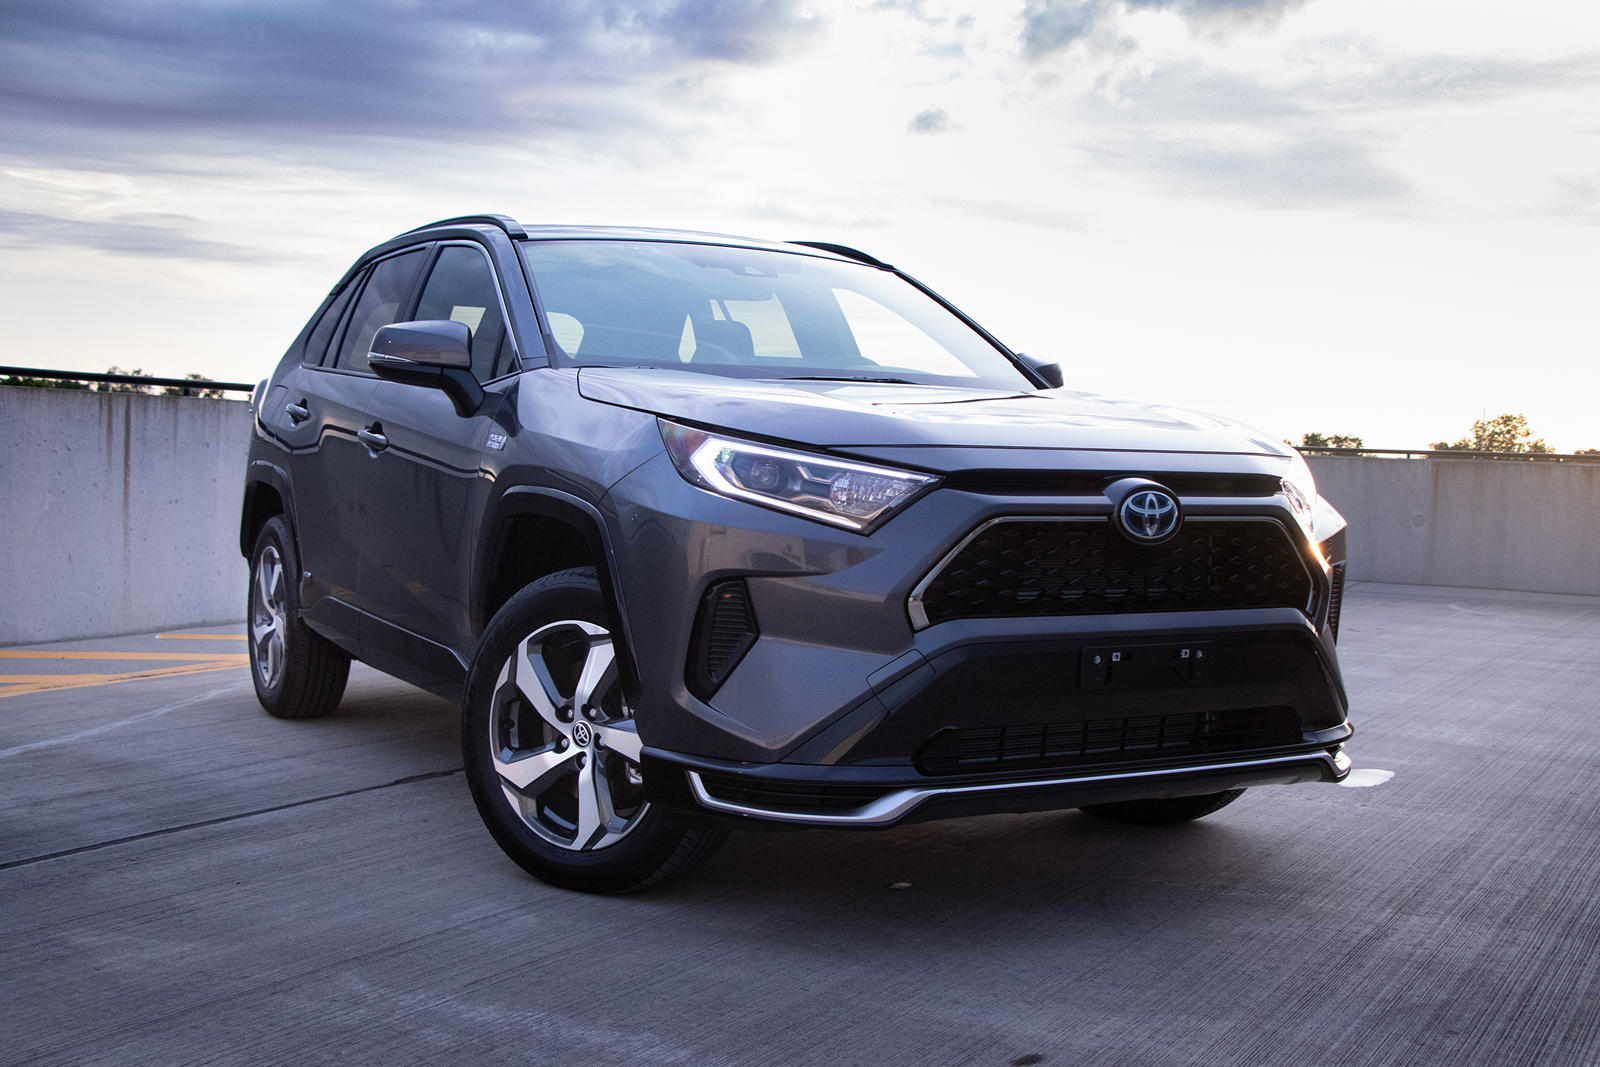 will-the-rav4-prime-be-eligible-for-tax-credit-o3a2a2ngiztmzm-the